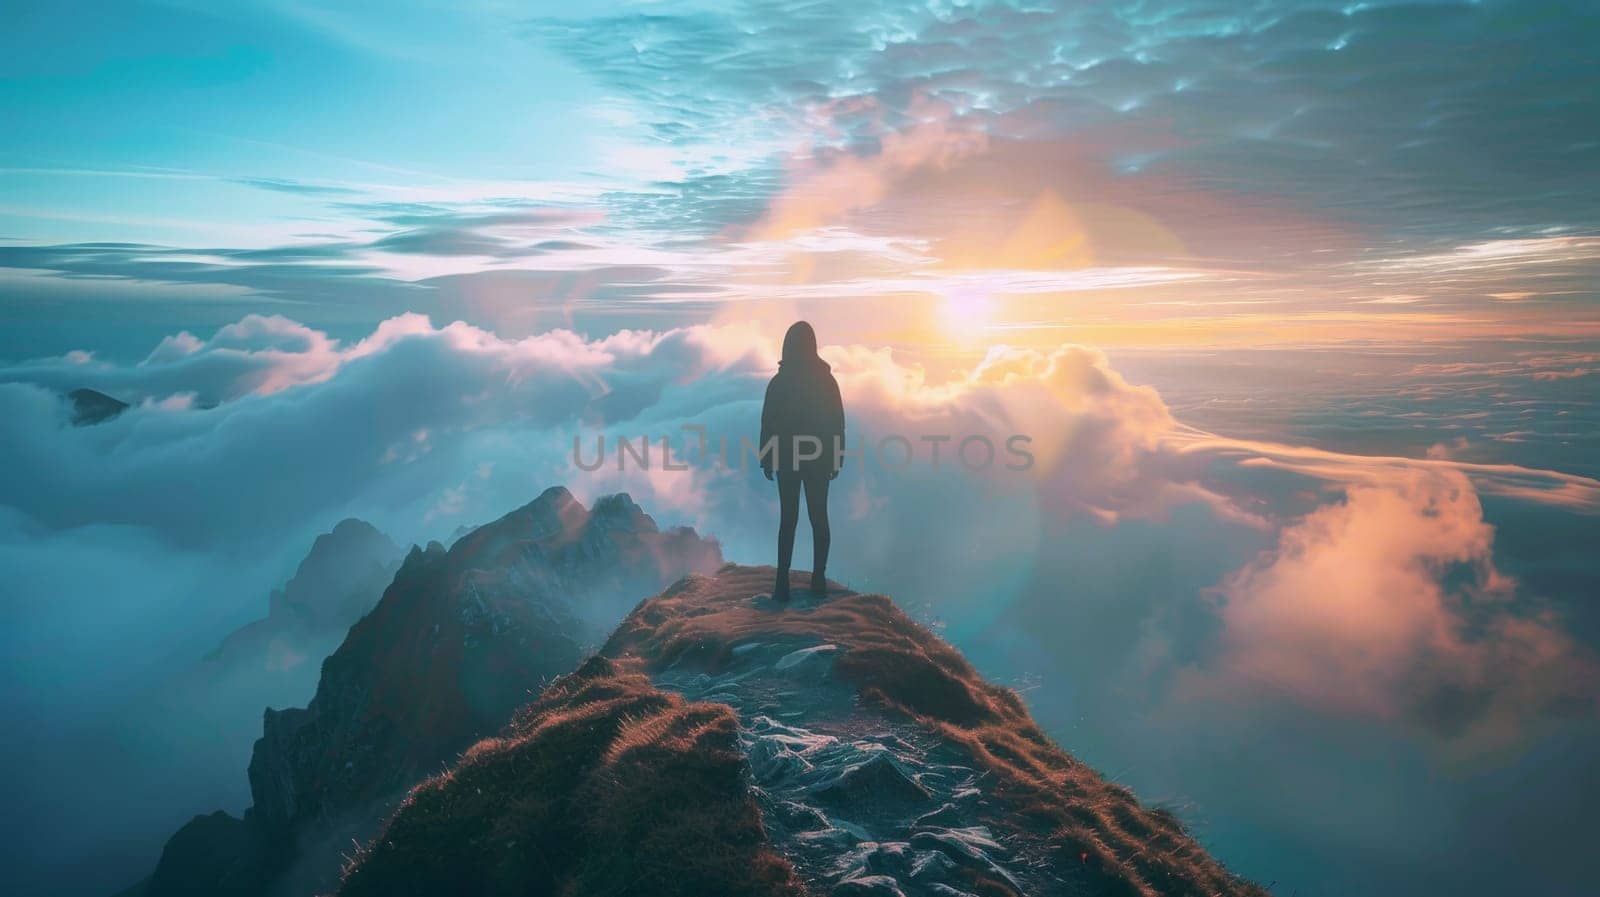 A woman stands on a mountain top, looking out at the clouds. The sky is a mix of blue and white, with a few clouds scattered throughout. Concept of solitude and contemplation